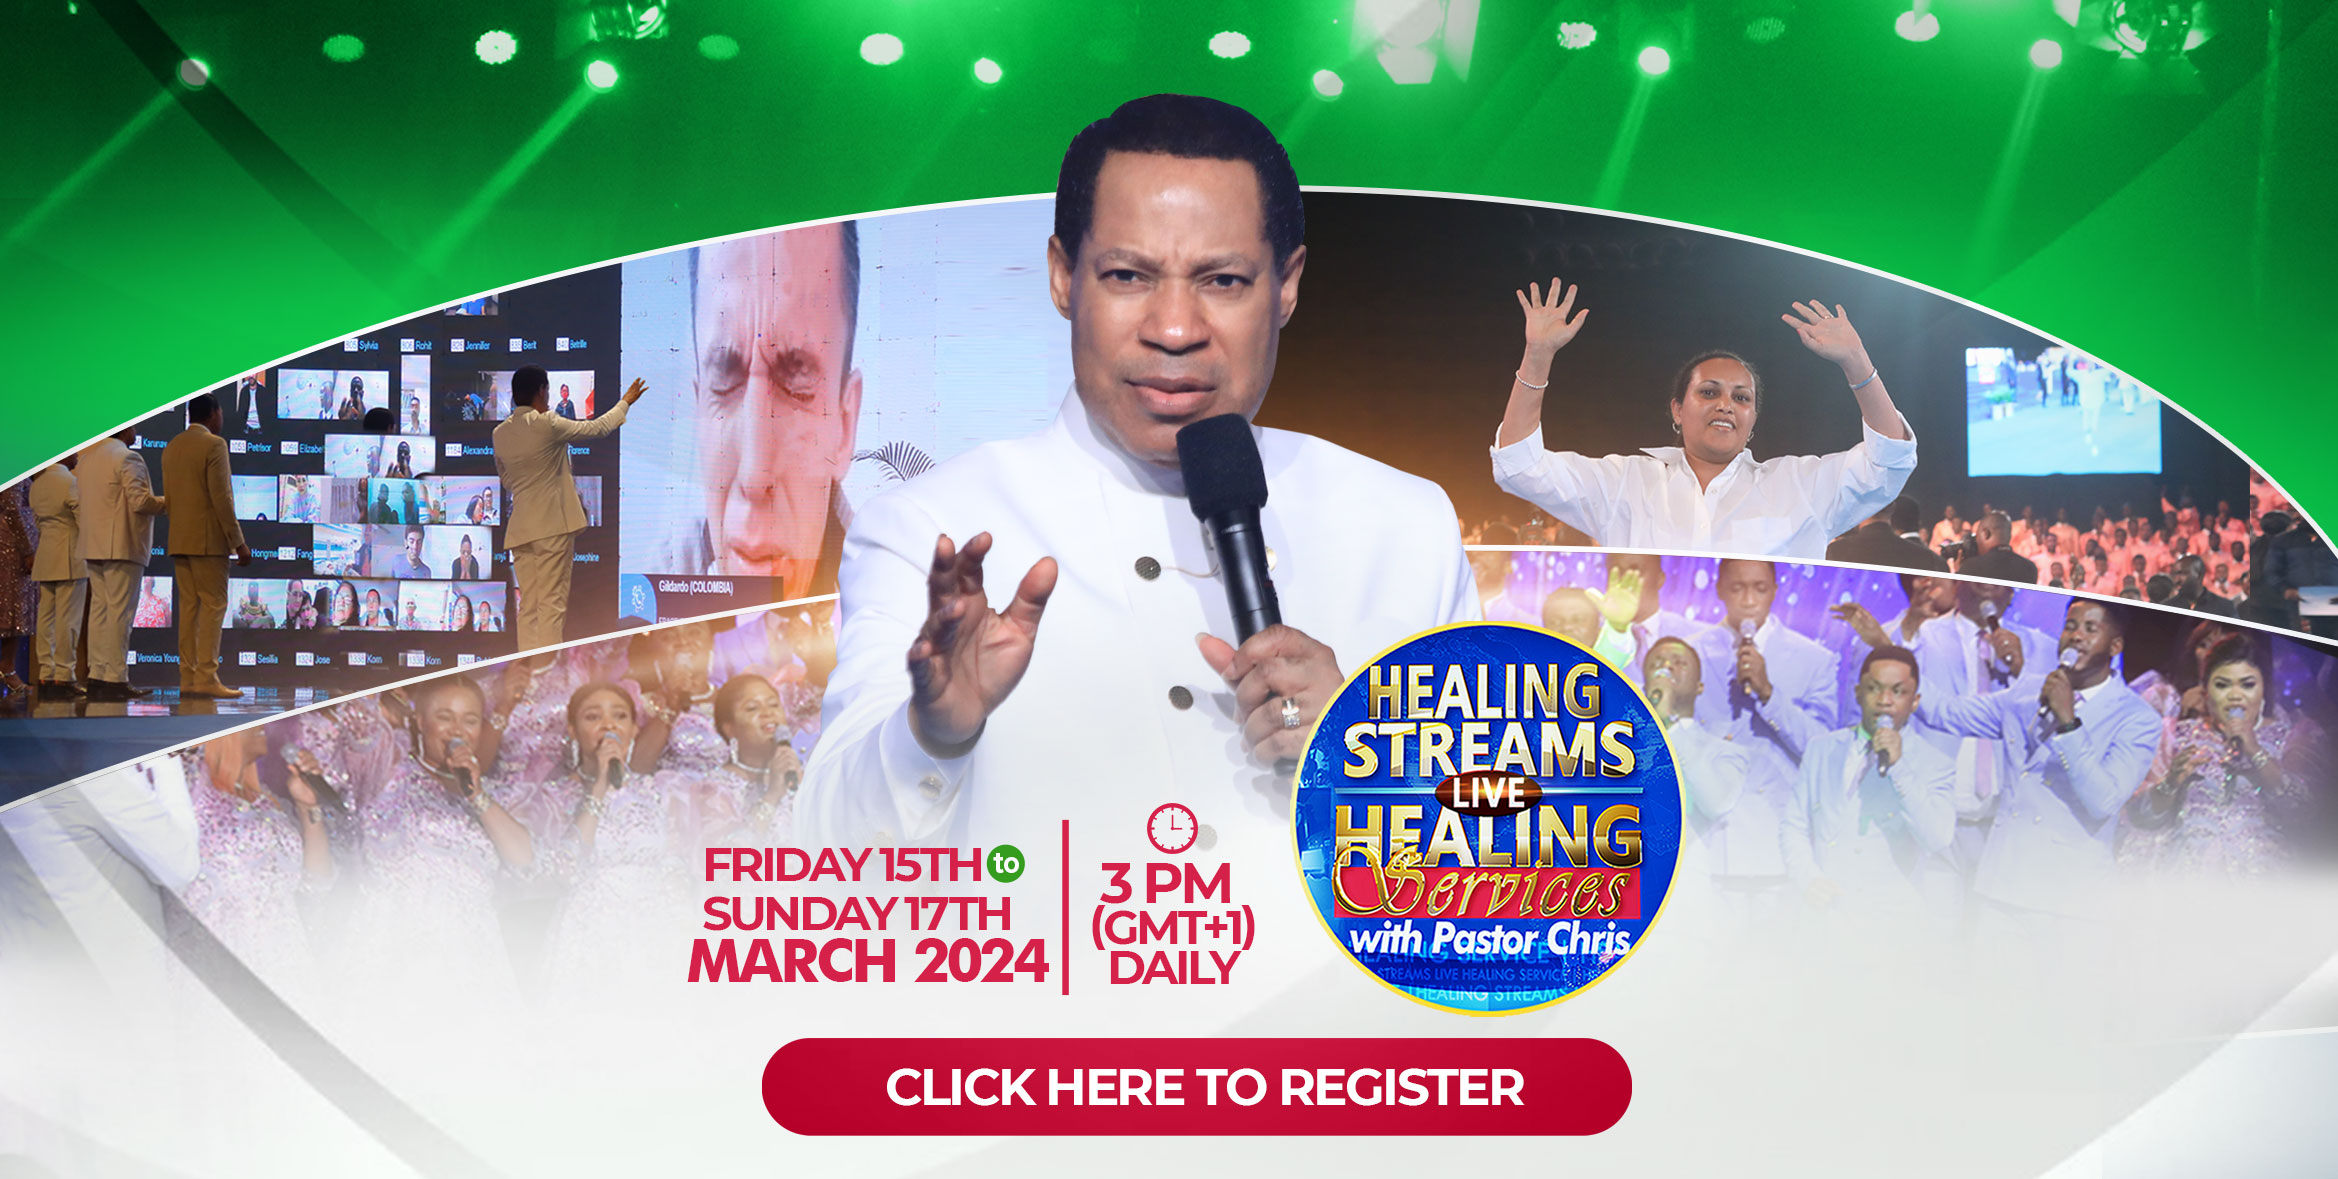 GET READY FOR THE EXTRAORDINARY AND SUPERNATURAL HEALING STREAMS LIVE HEALING SERVICES!